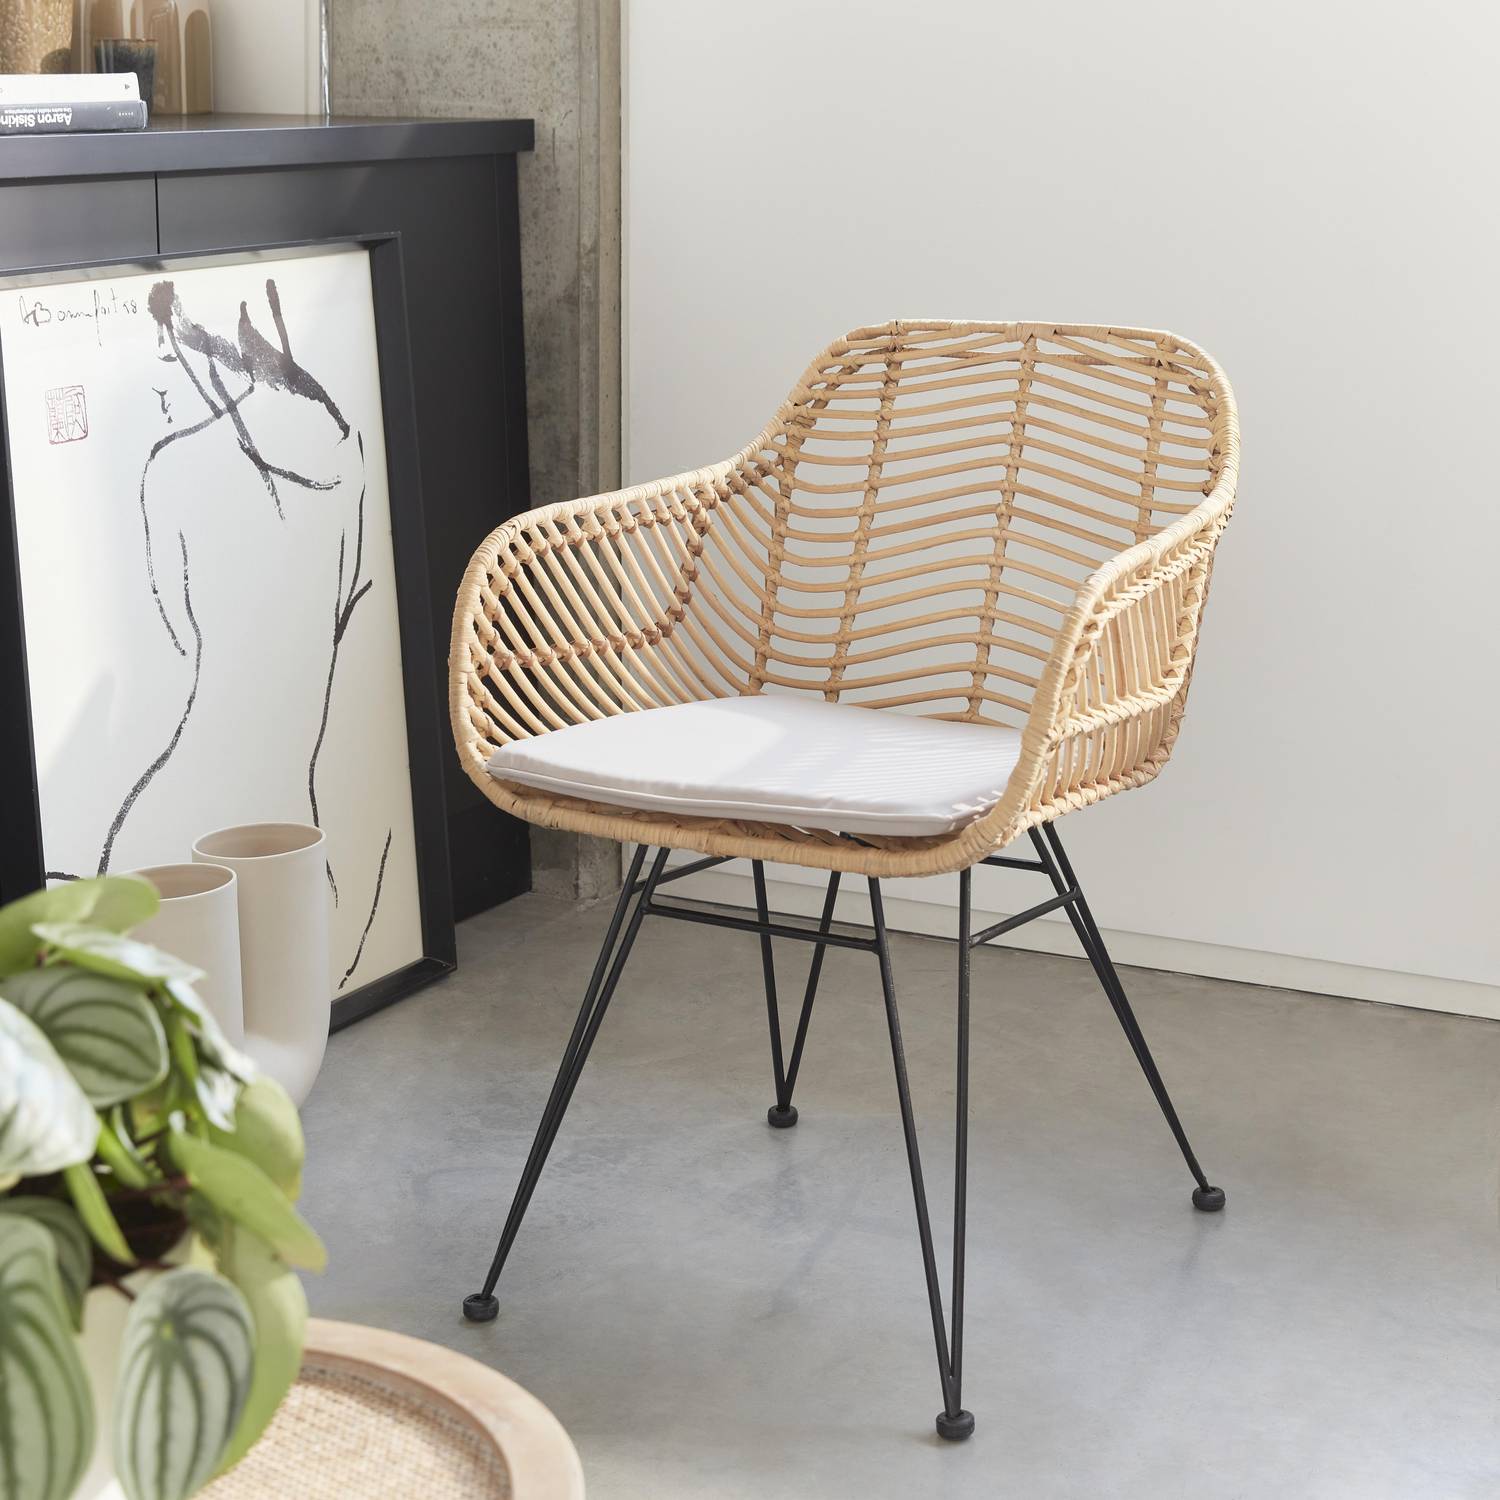 Rattan dining armchair with metal legs and cushion - Cahya - Natural rattan, White cushion Photo1